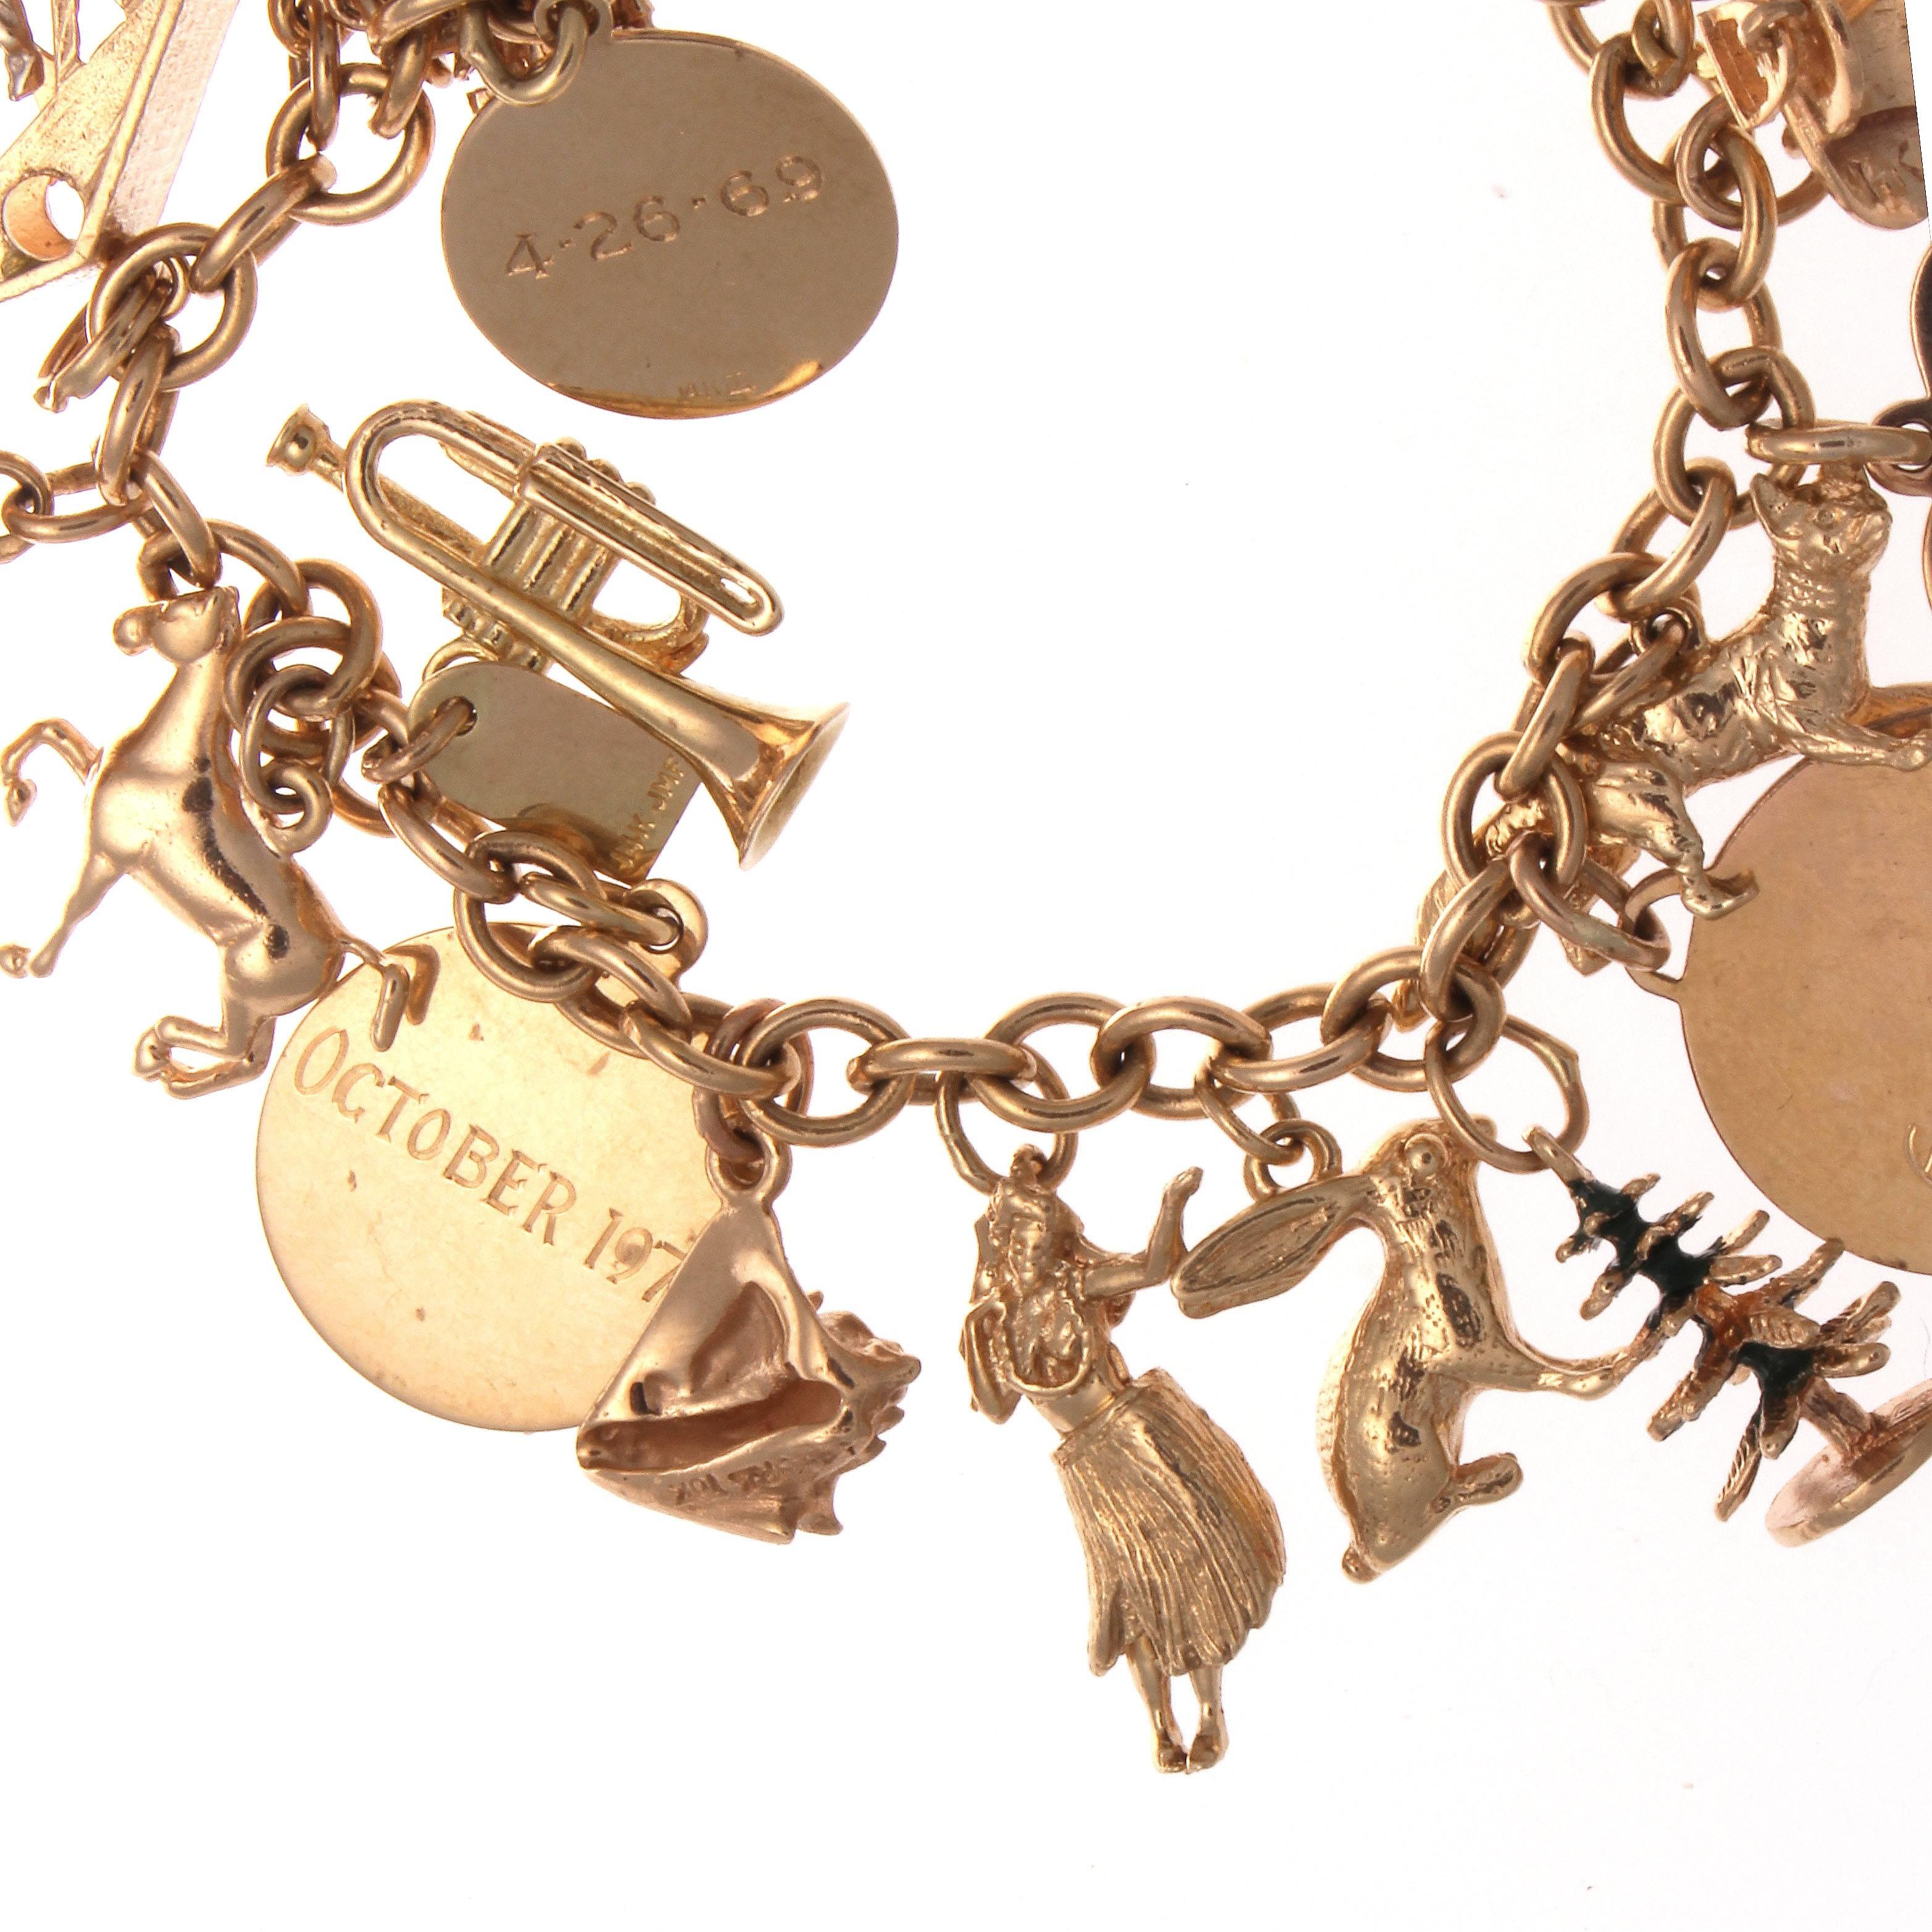 A charm bracelet full of whimsy and fun to wear for the jingle jangle sounds the many charms make as you move about your day.